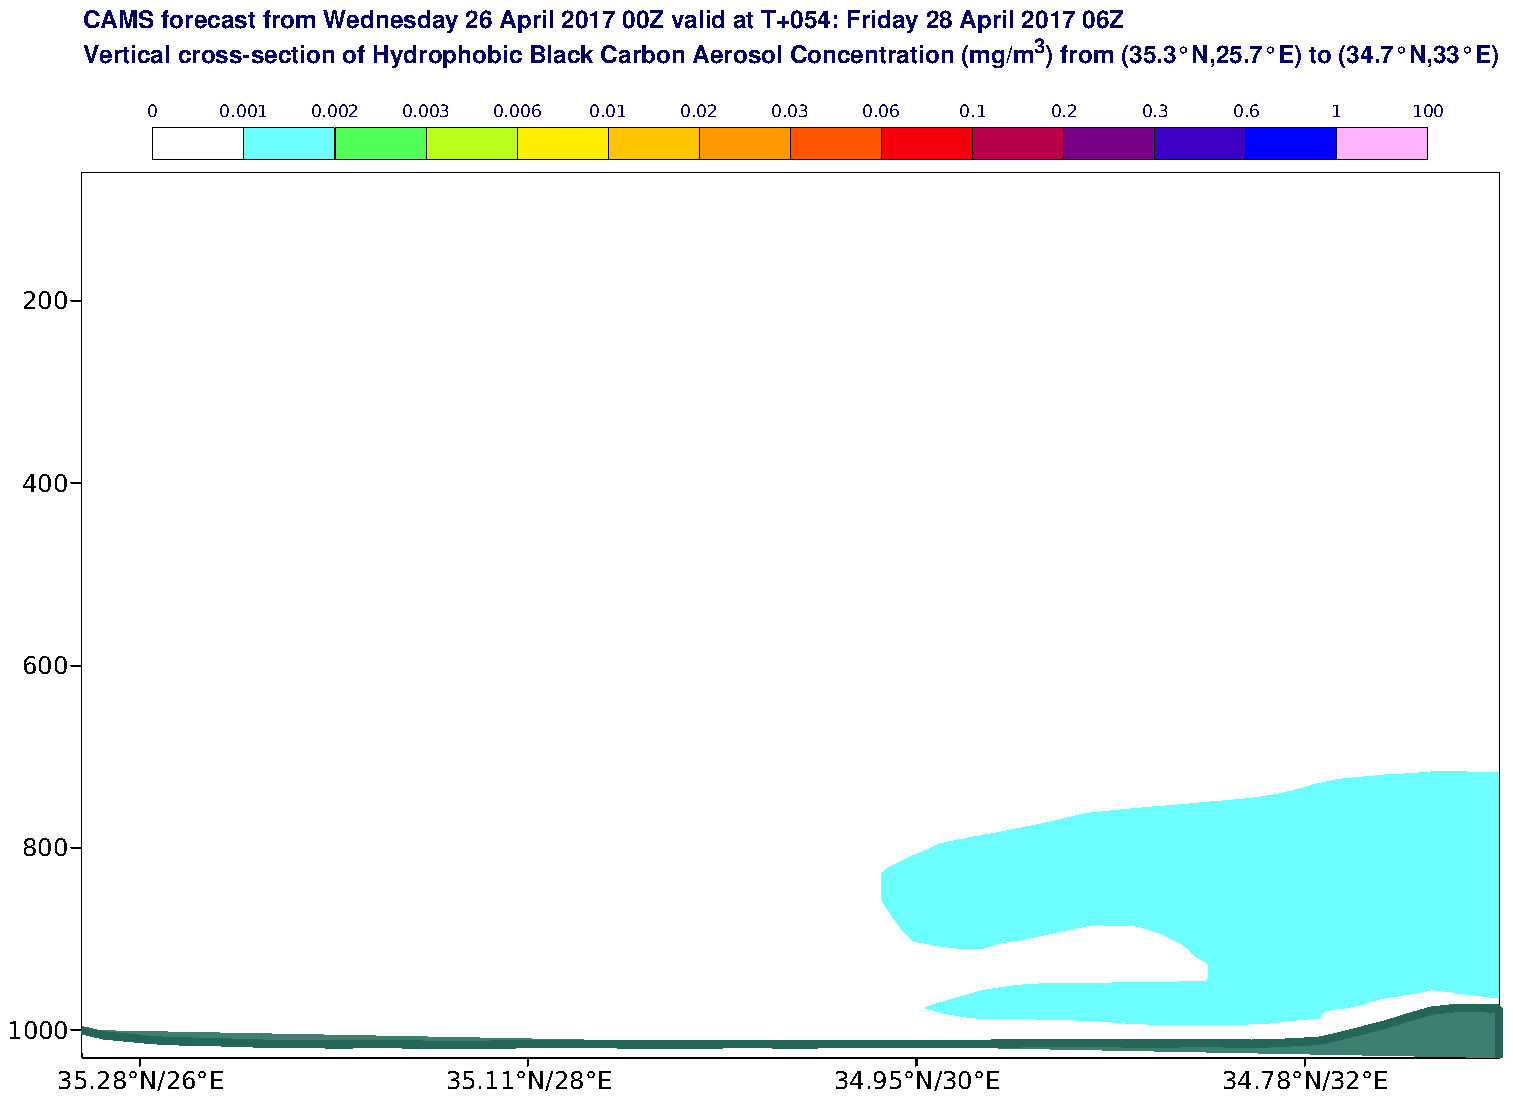 Vertical cross-section of Hydrophobic Black Carbon Aerosol Concentration (mg/m3) valid at T54 - 2017-04-28 06:00